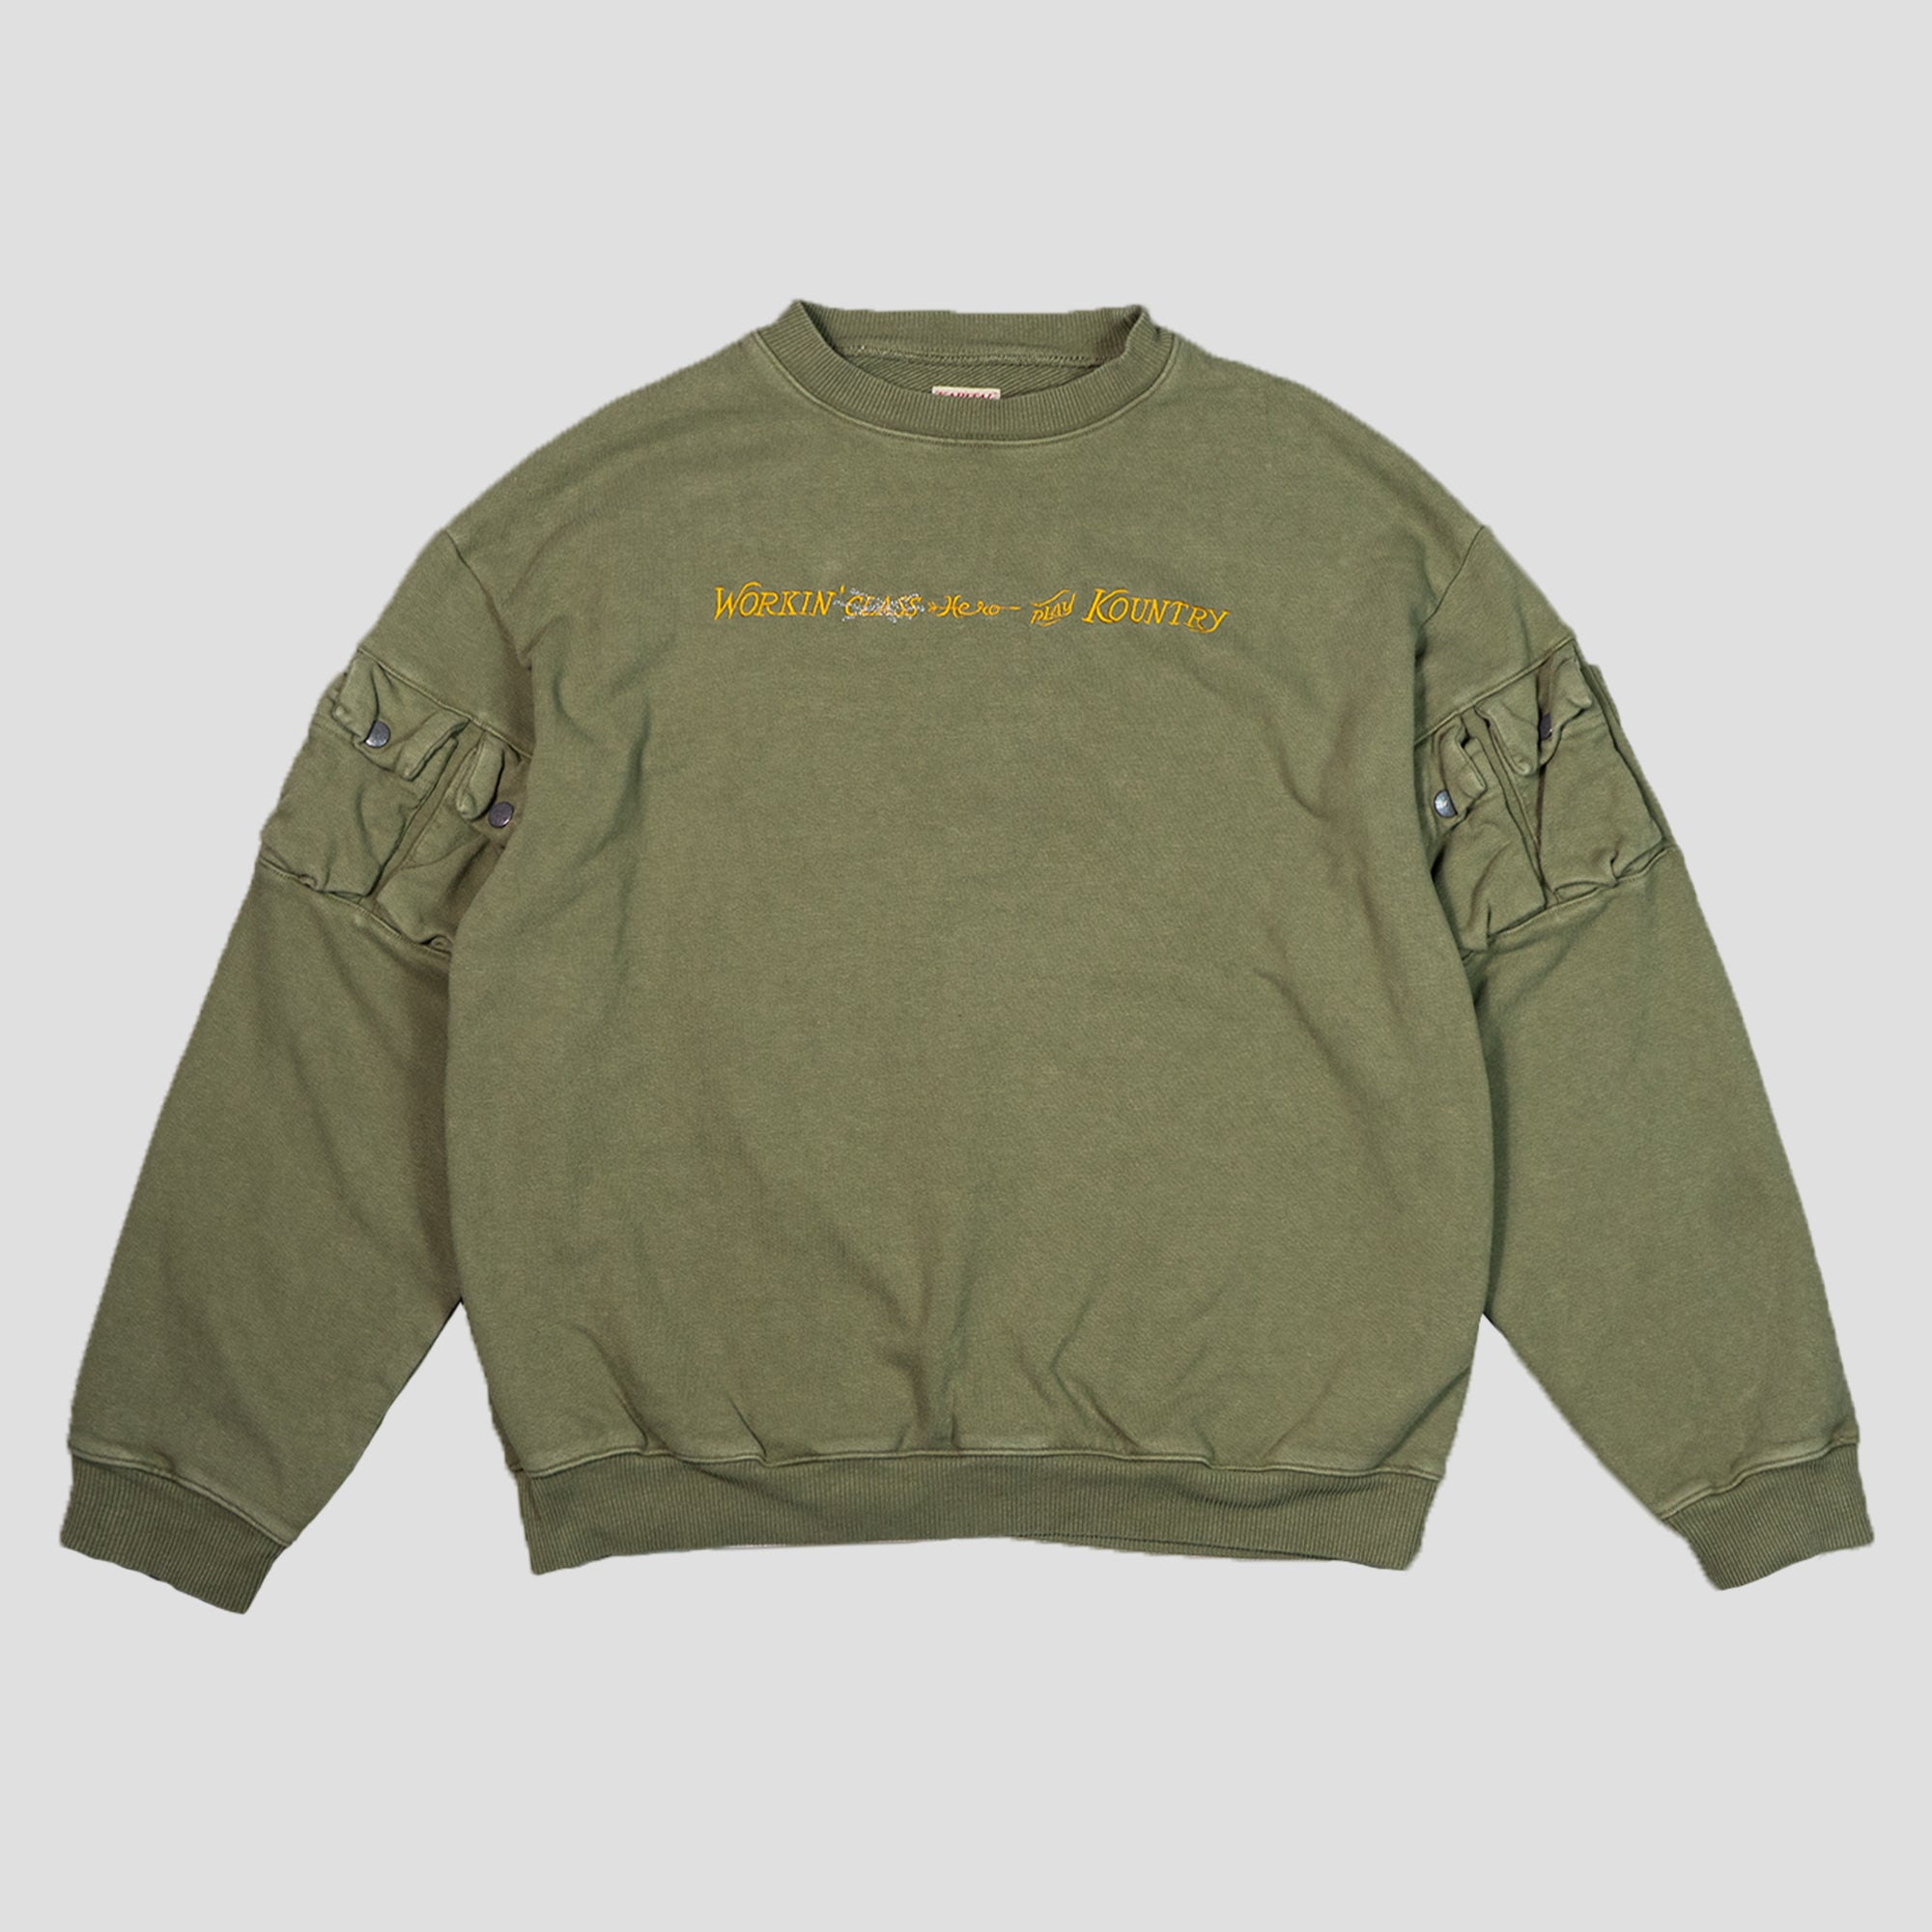 SWEAT SHIRTS WITH UTILITY POCKETS ON SLEEVES